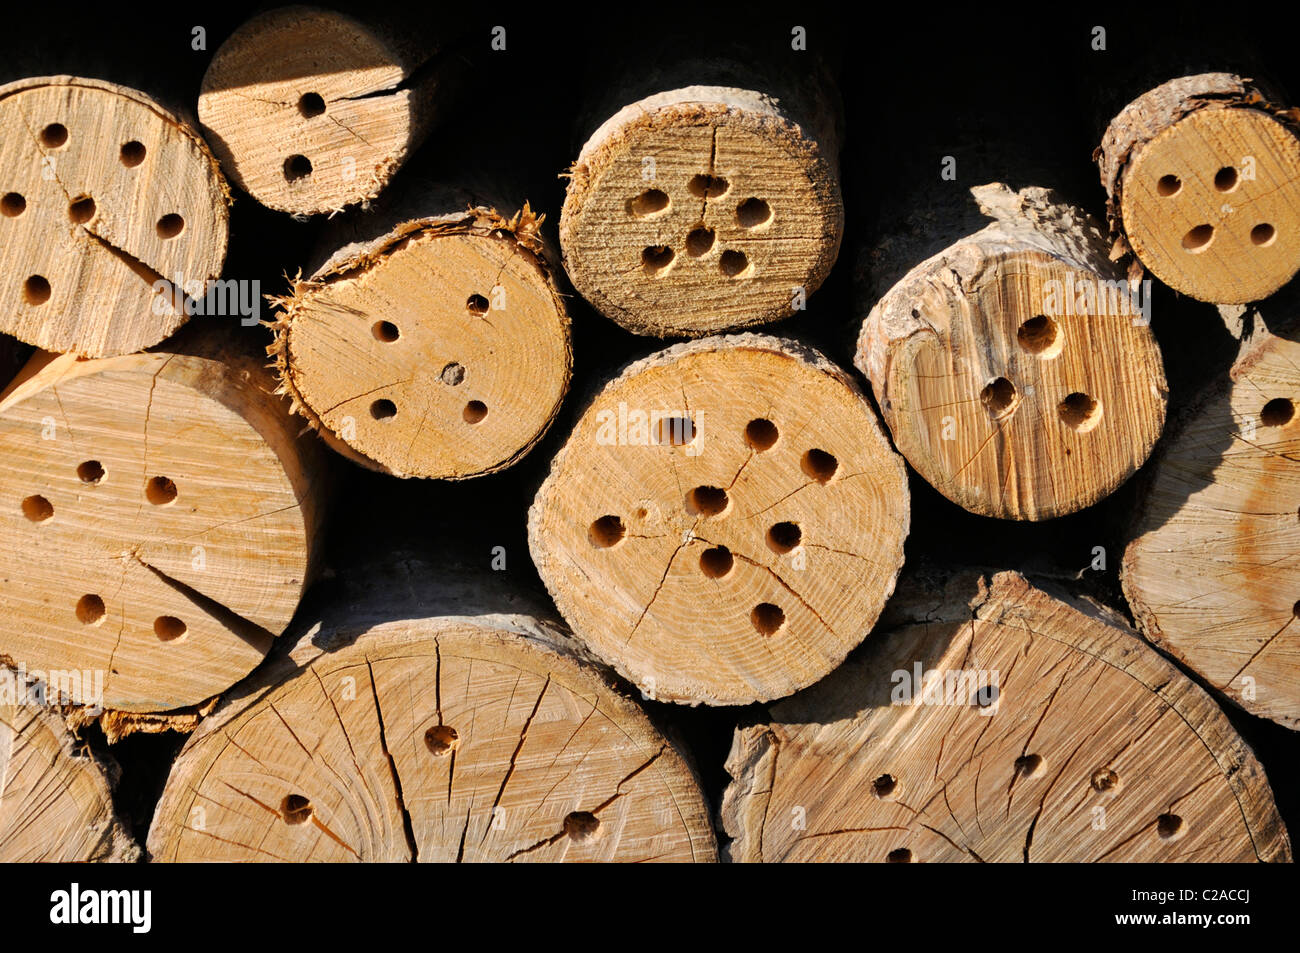 Nesting aid for insects made of tree trunks Stock Photo